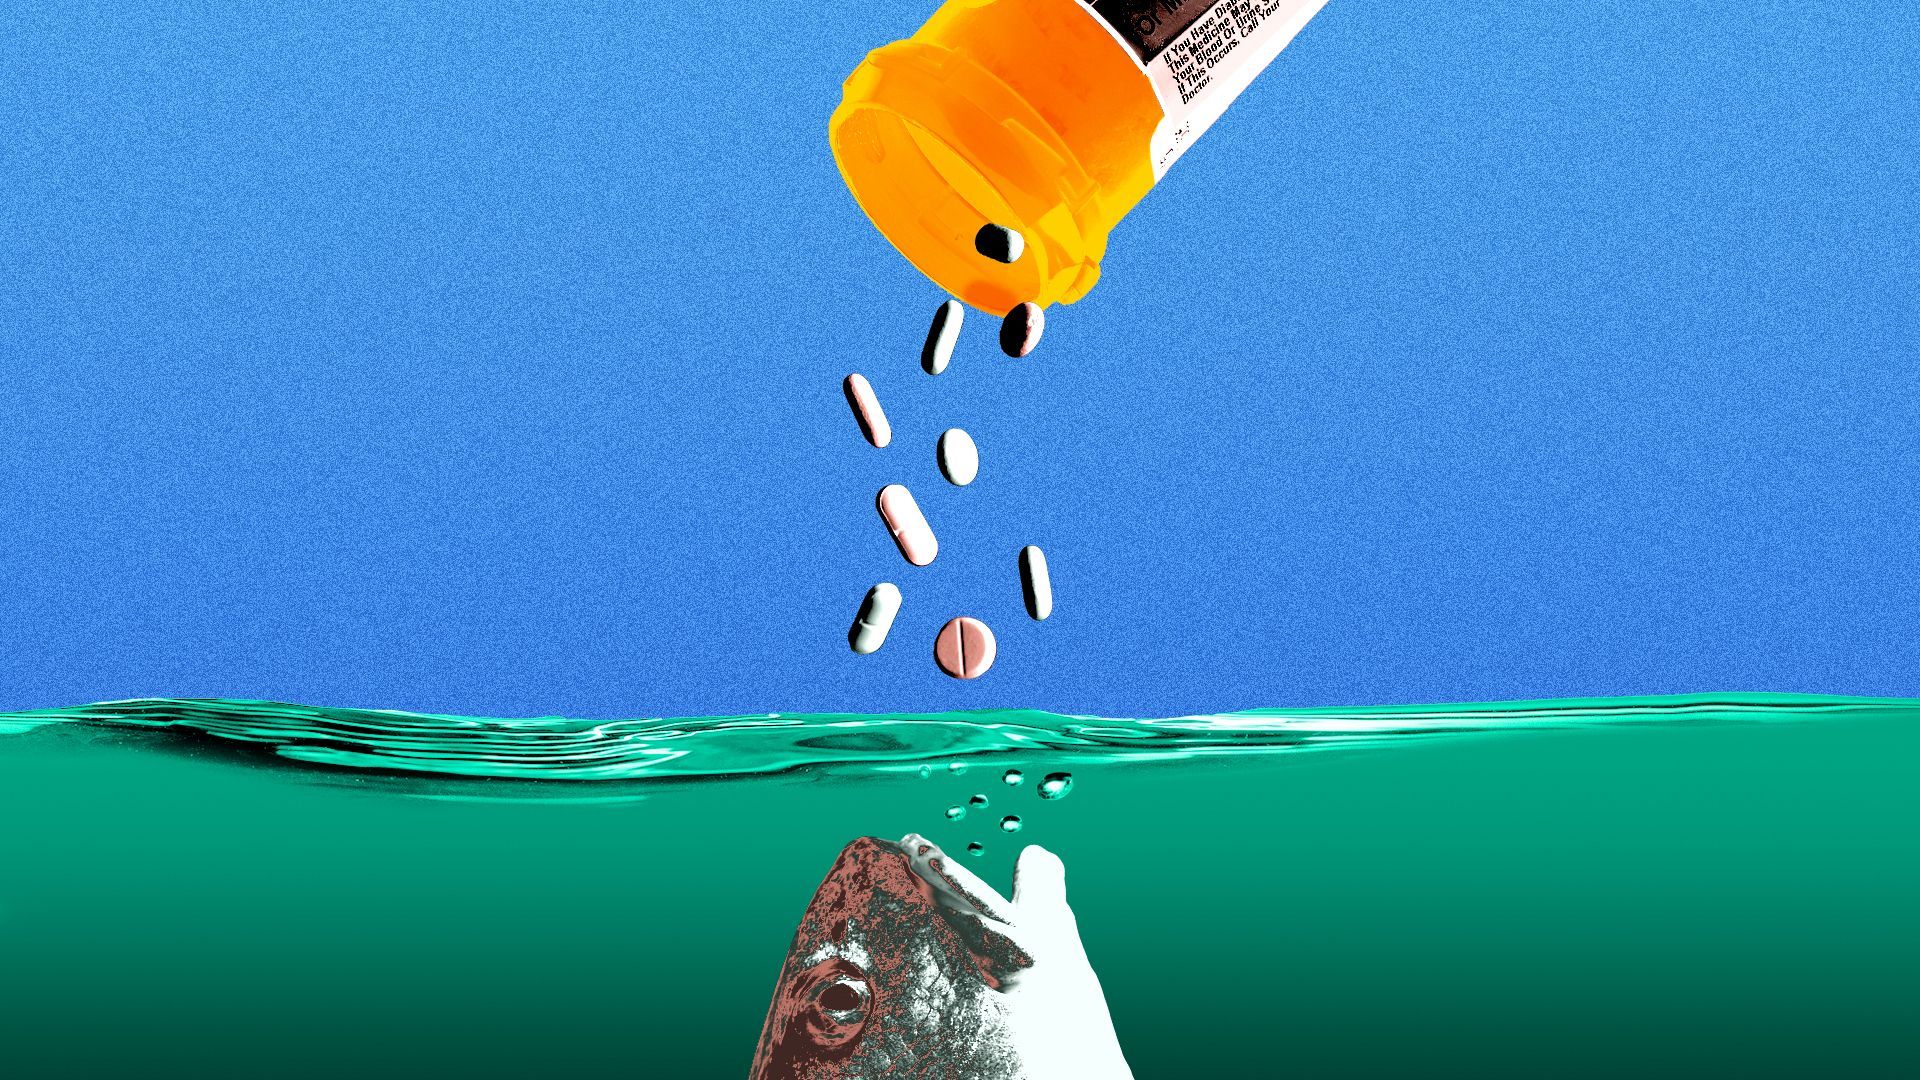 Illustration of a redfish with an open mouth rising to the surface to get pills being spilled out of a prescription bottle like fish food. 